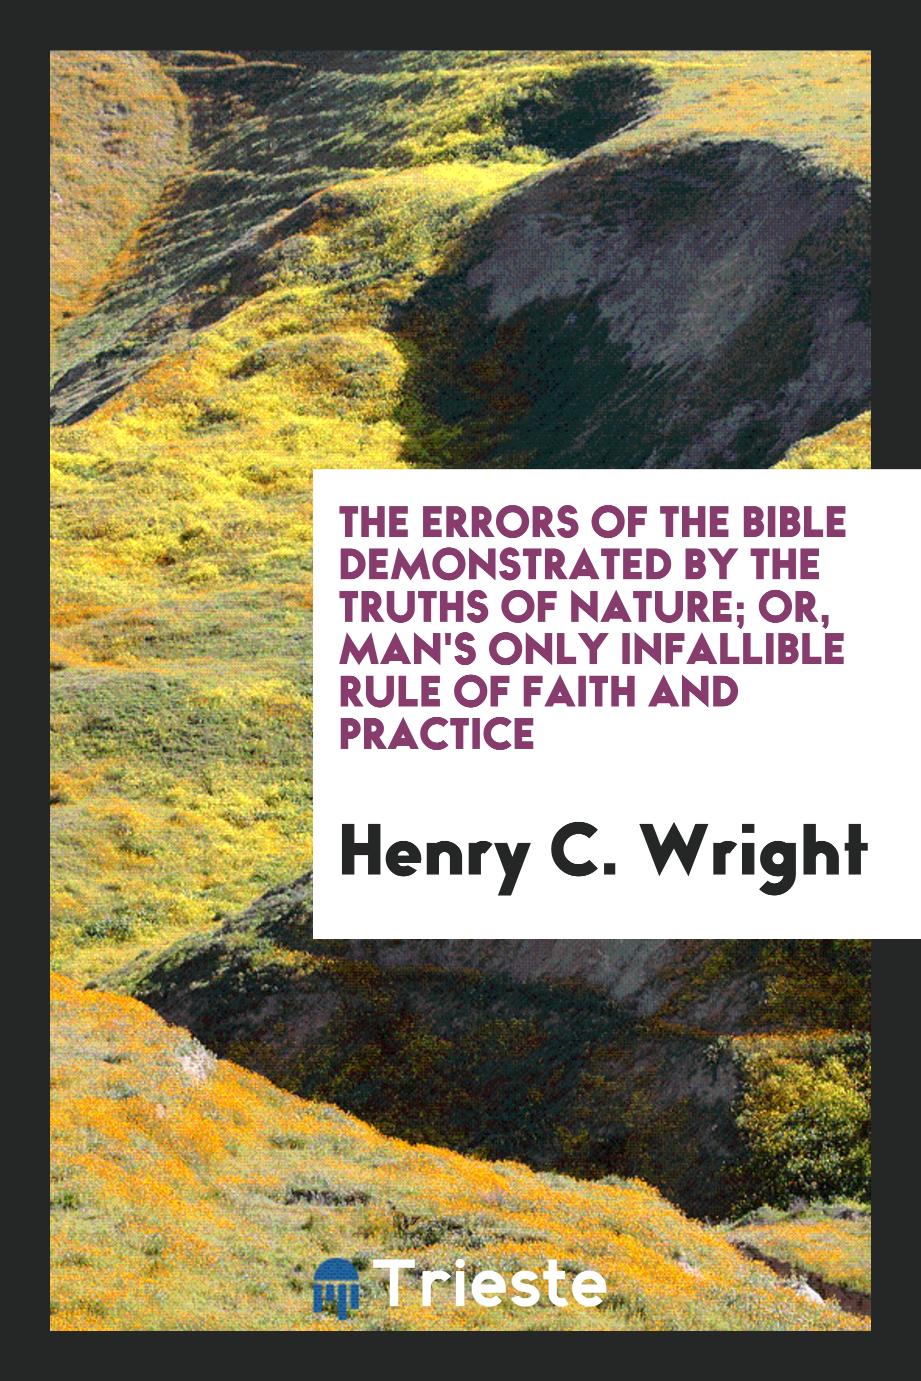 Henry C. Wright - The Errors of the Bible Demonstrated by the Truths of Nature; Or, Man's Only Infallible Rule of Faith and Practice